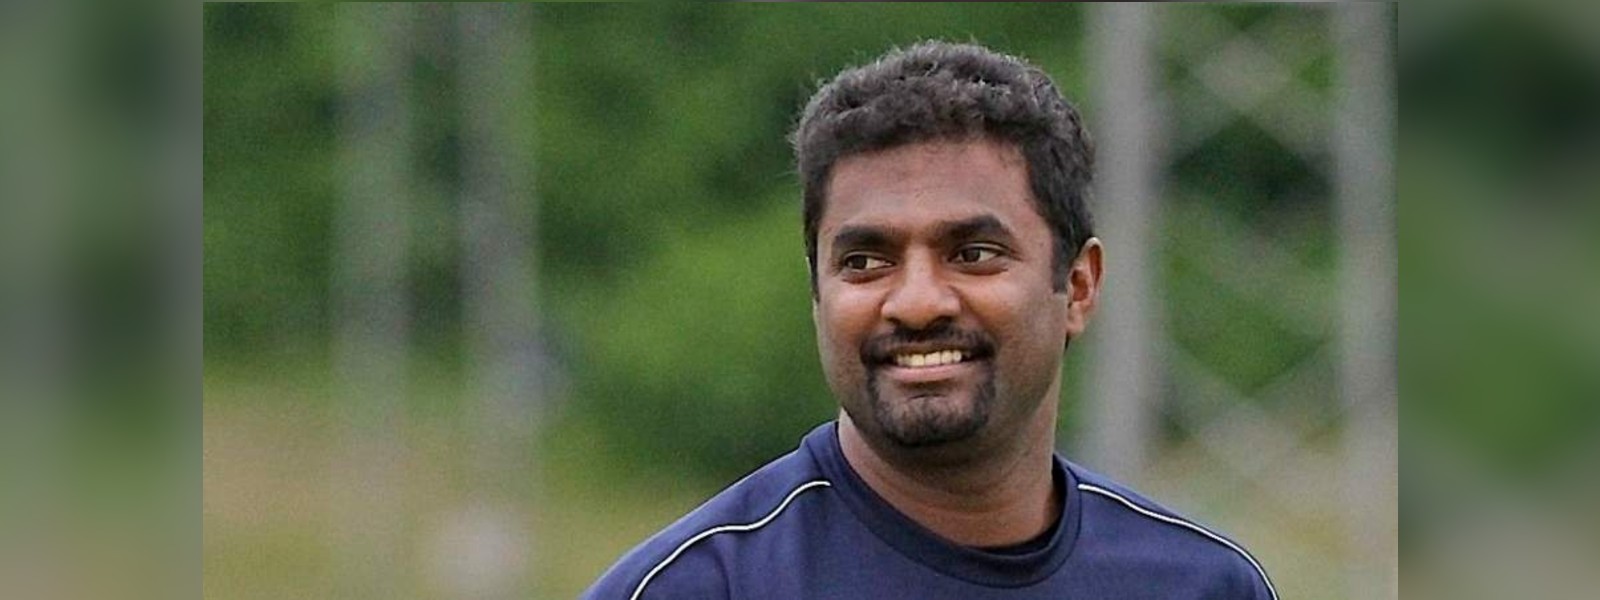 Muttiah Muralitharan’s official statement on ‘800’ controversy